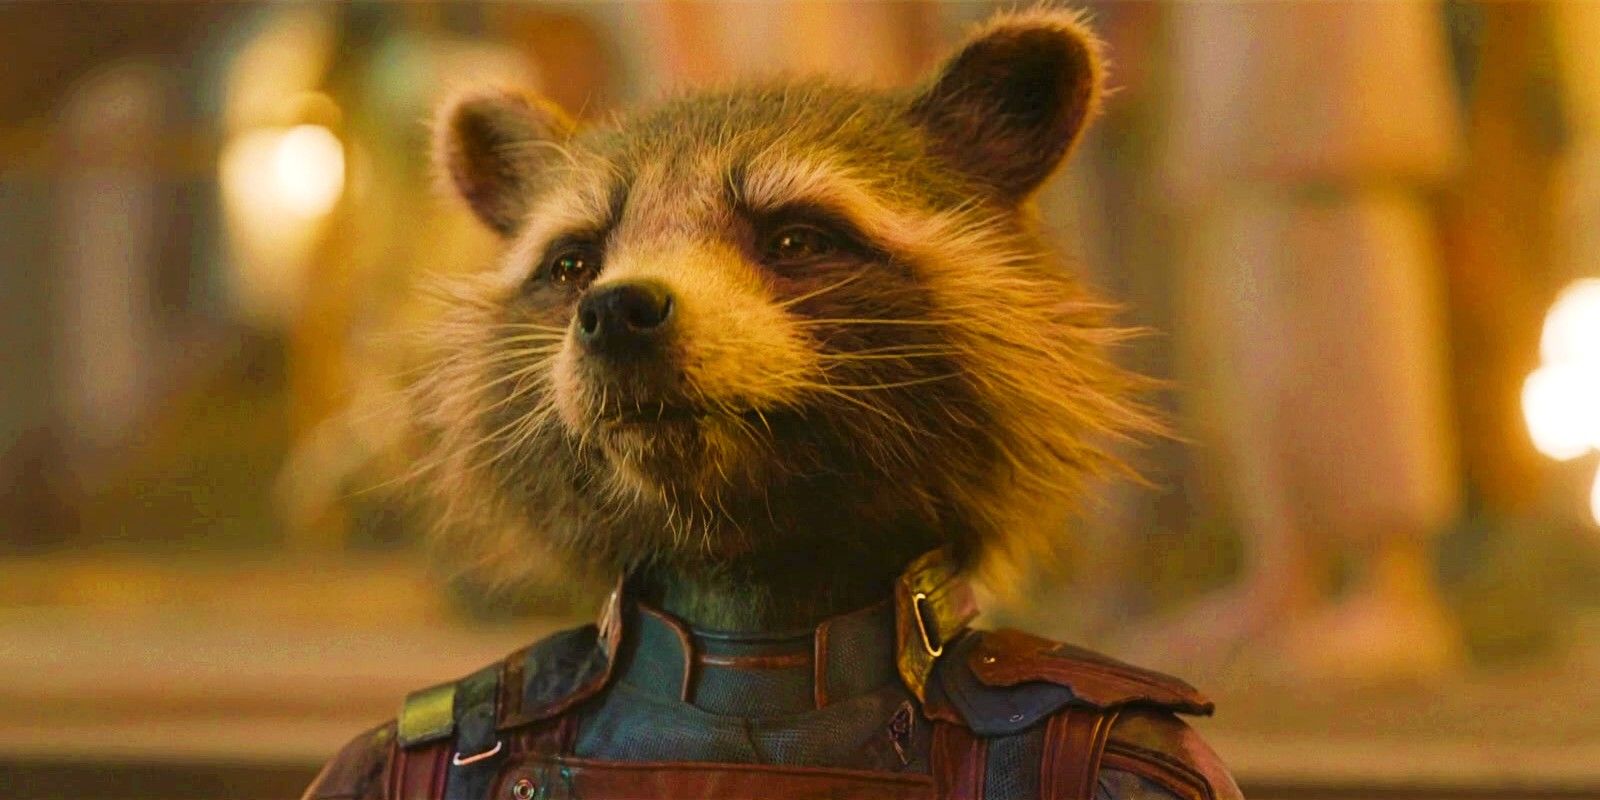 Rocket Raccoon standing tall with his new team suit in Guardians of the Galaxy 3